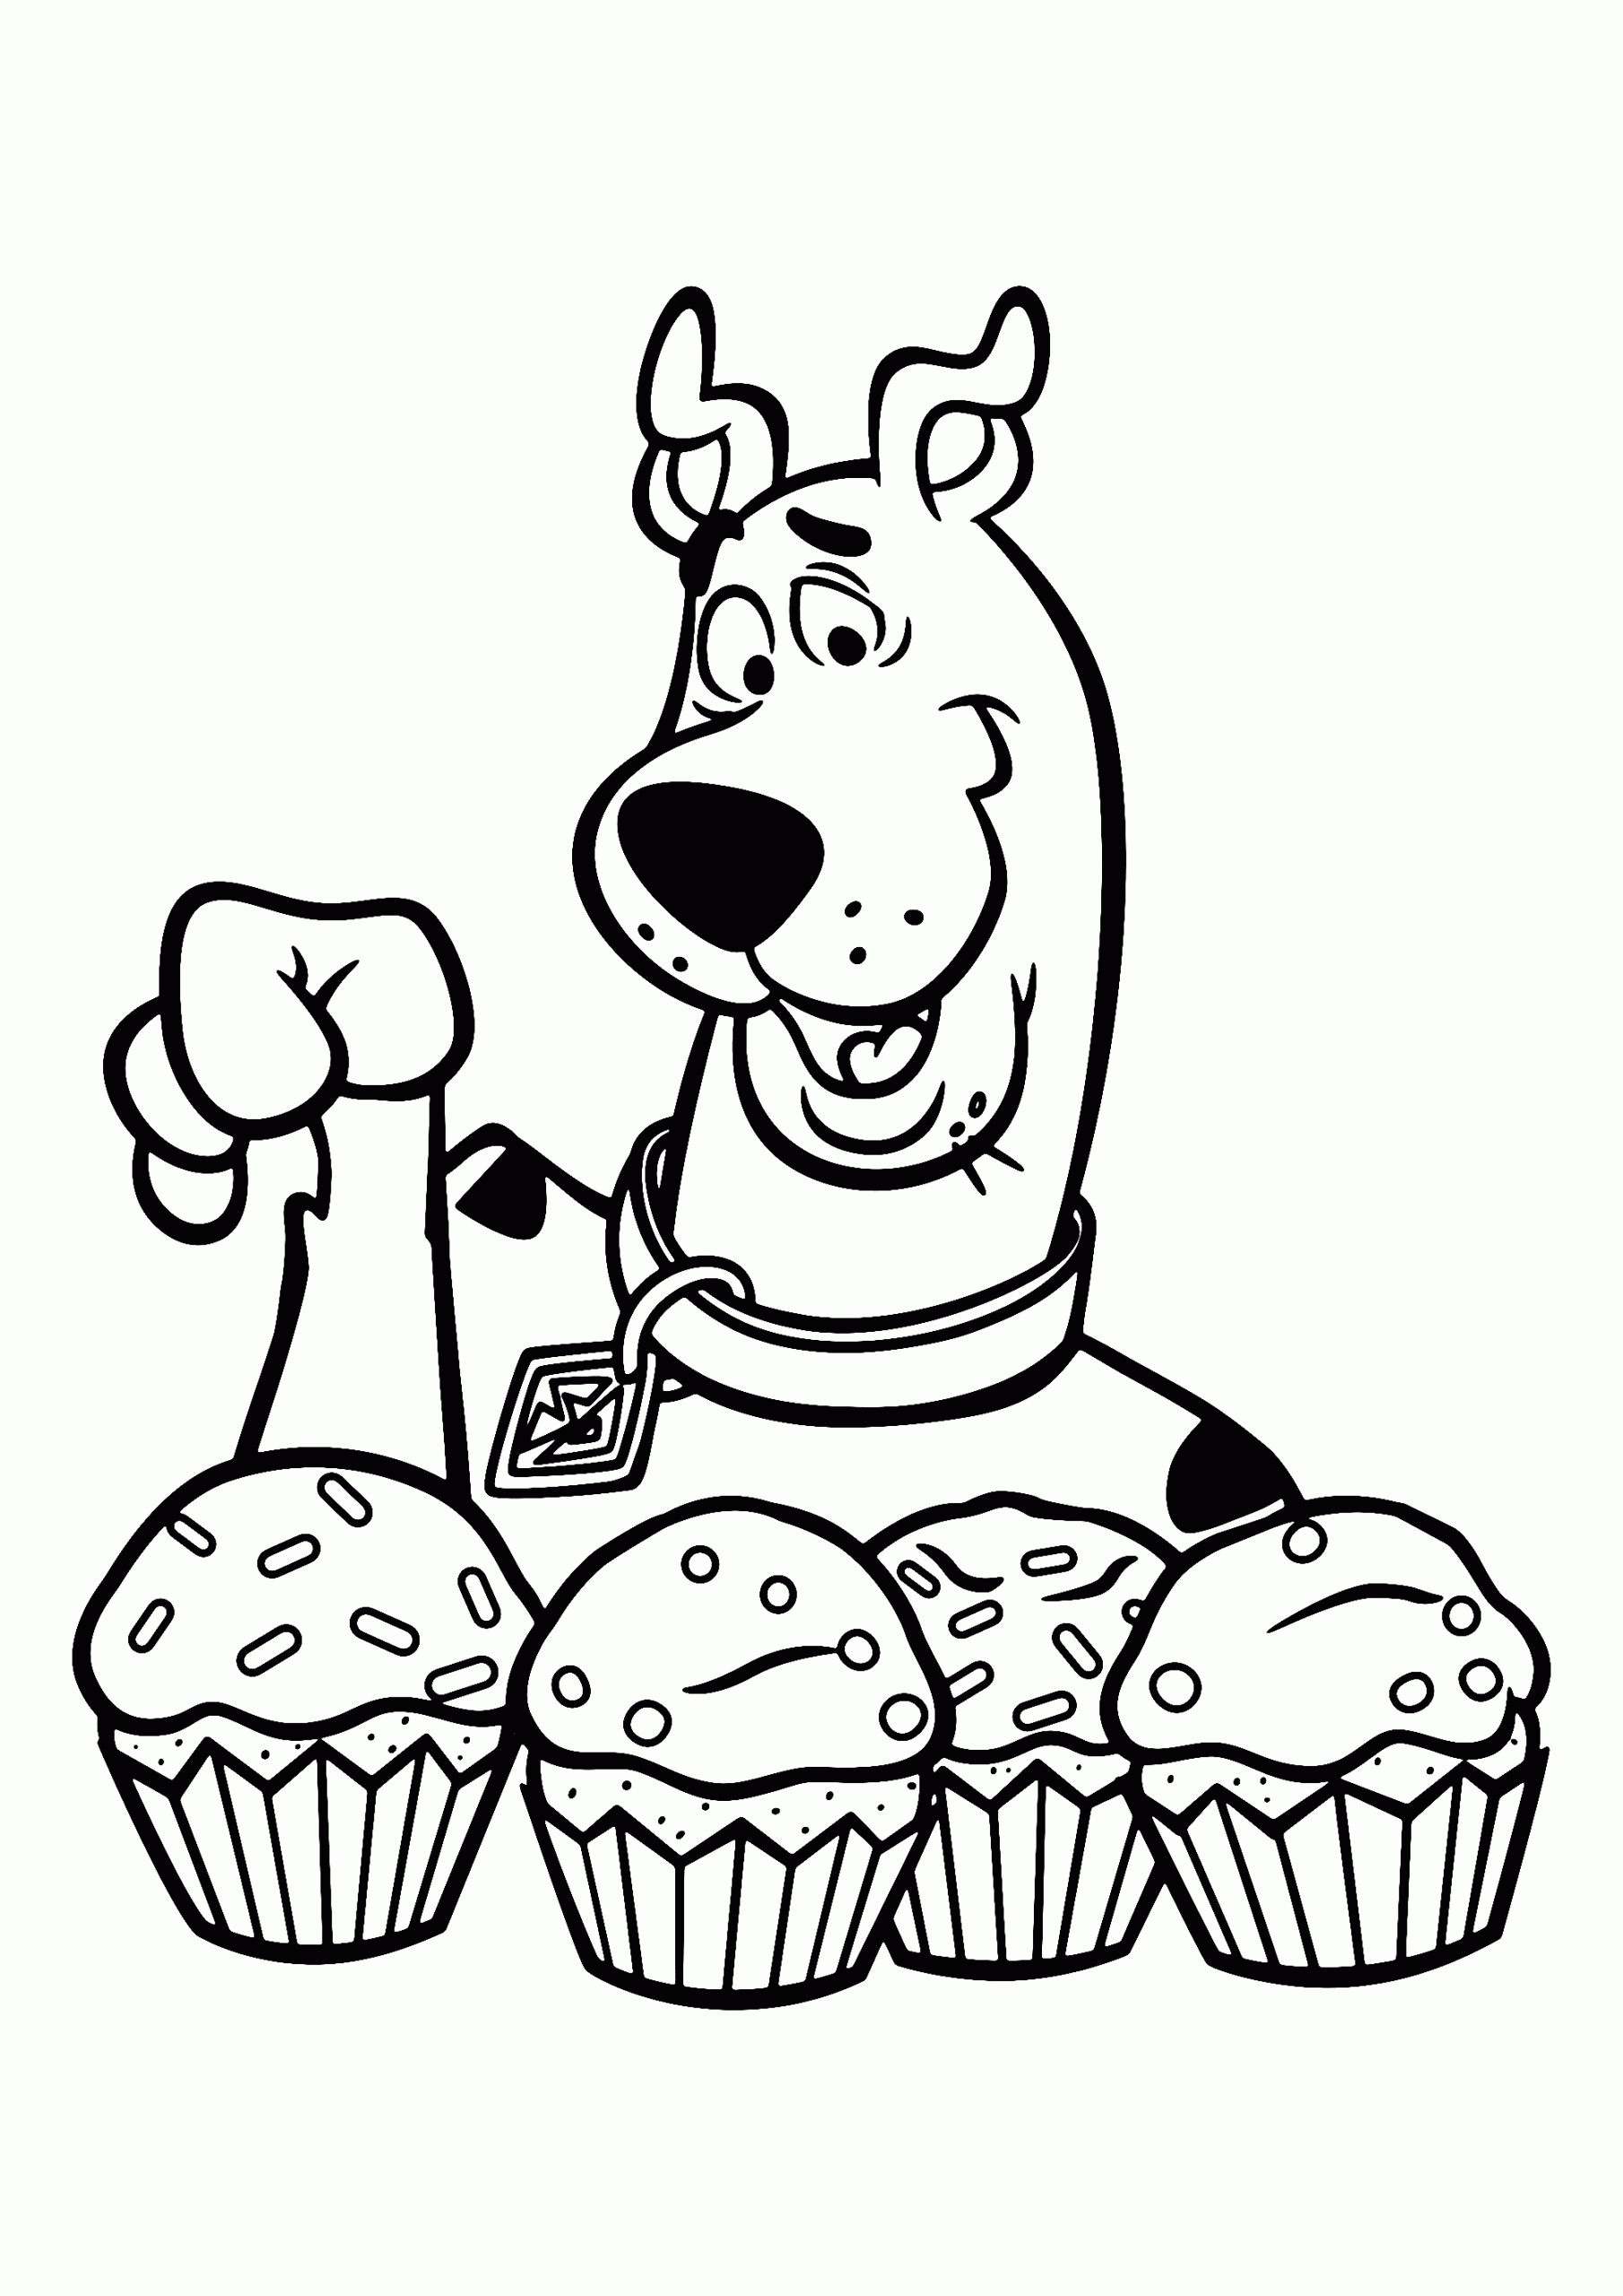 Classic Scooby Doo Printable Coloring Pages » Print Color Craft